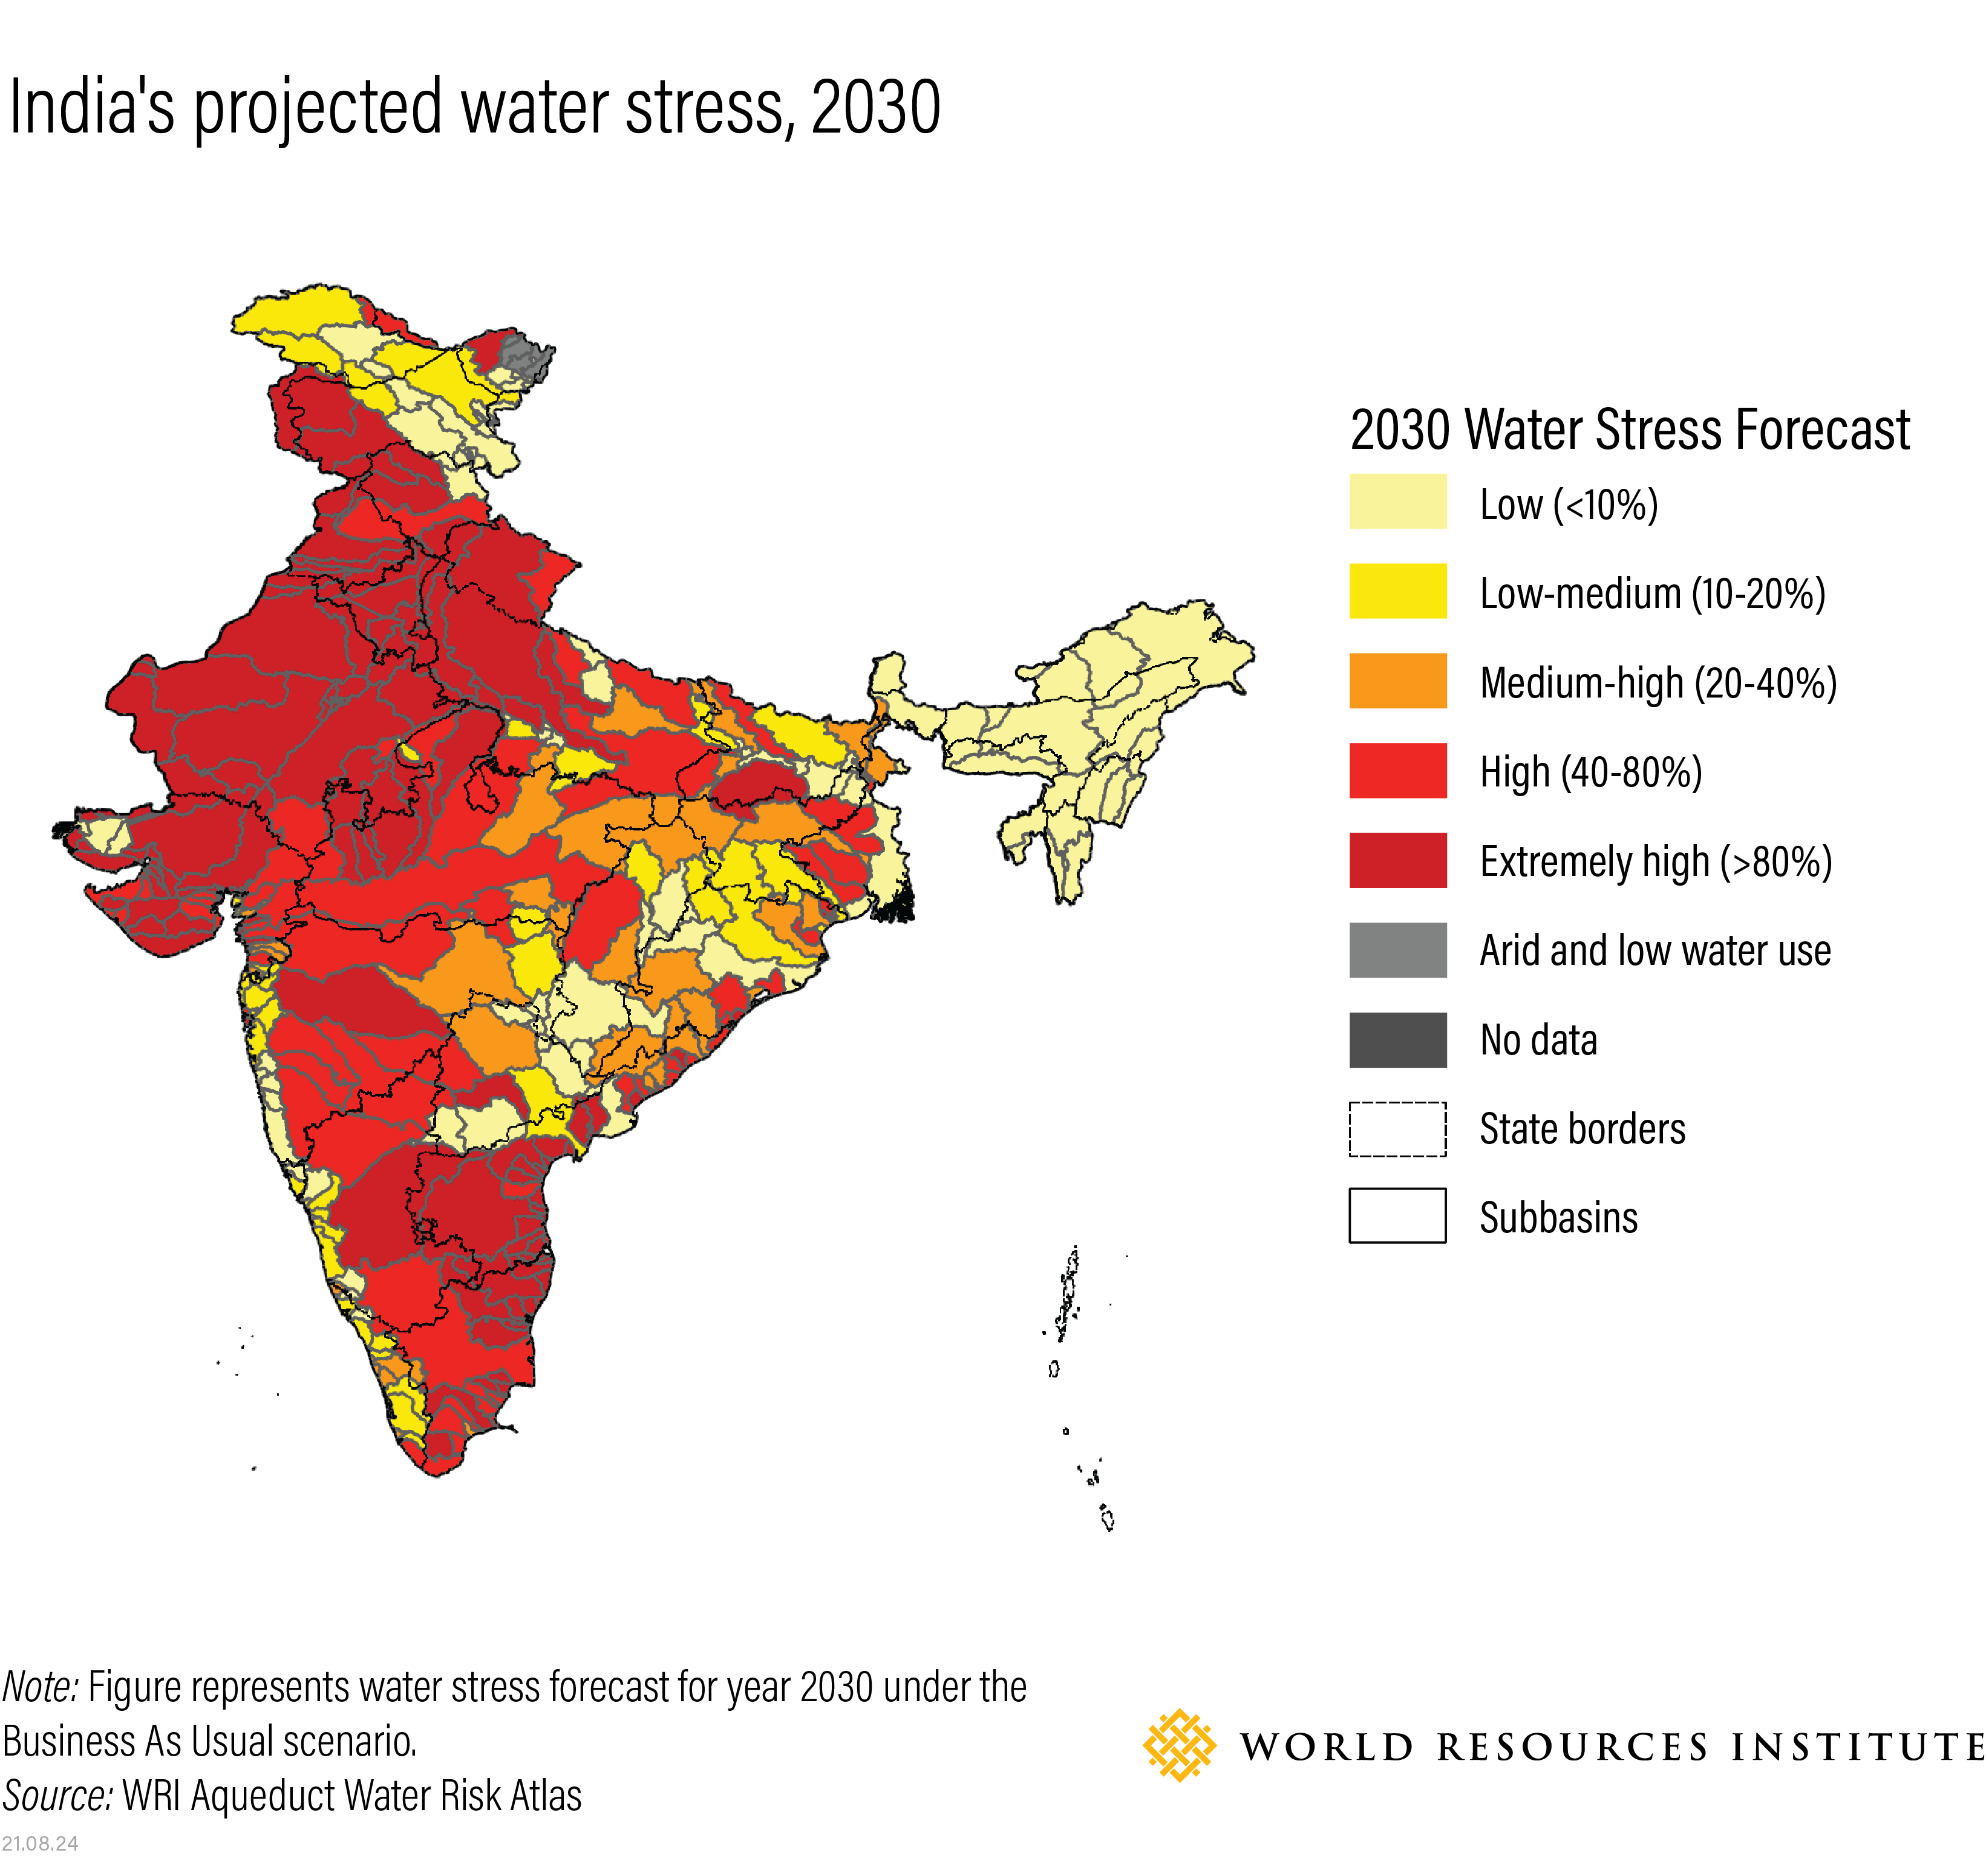 Projections show India will be under severe water stress by the end of the decade.